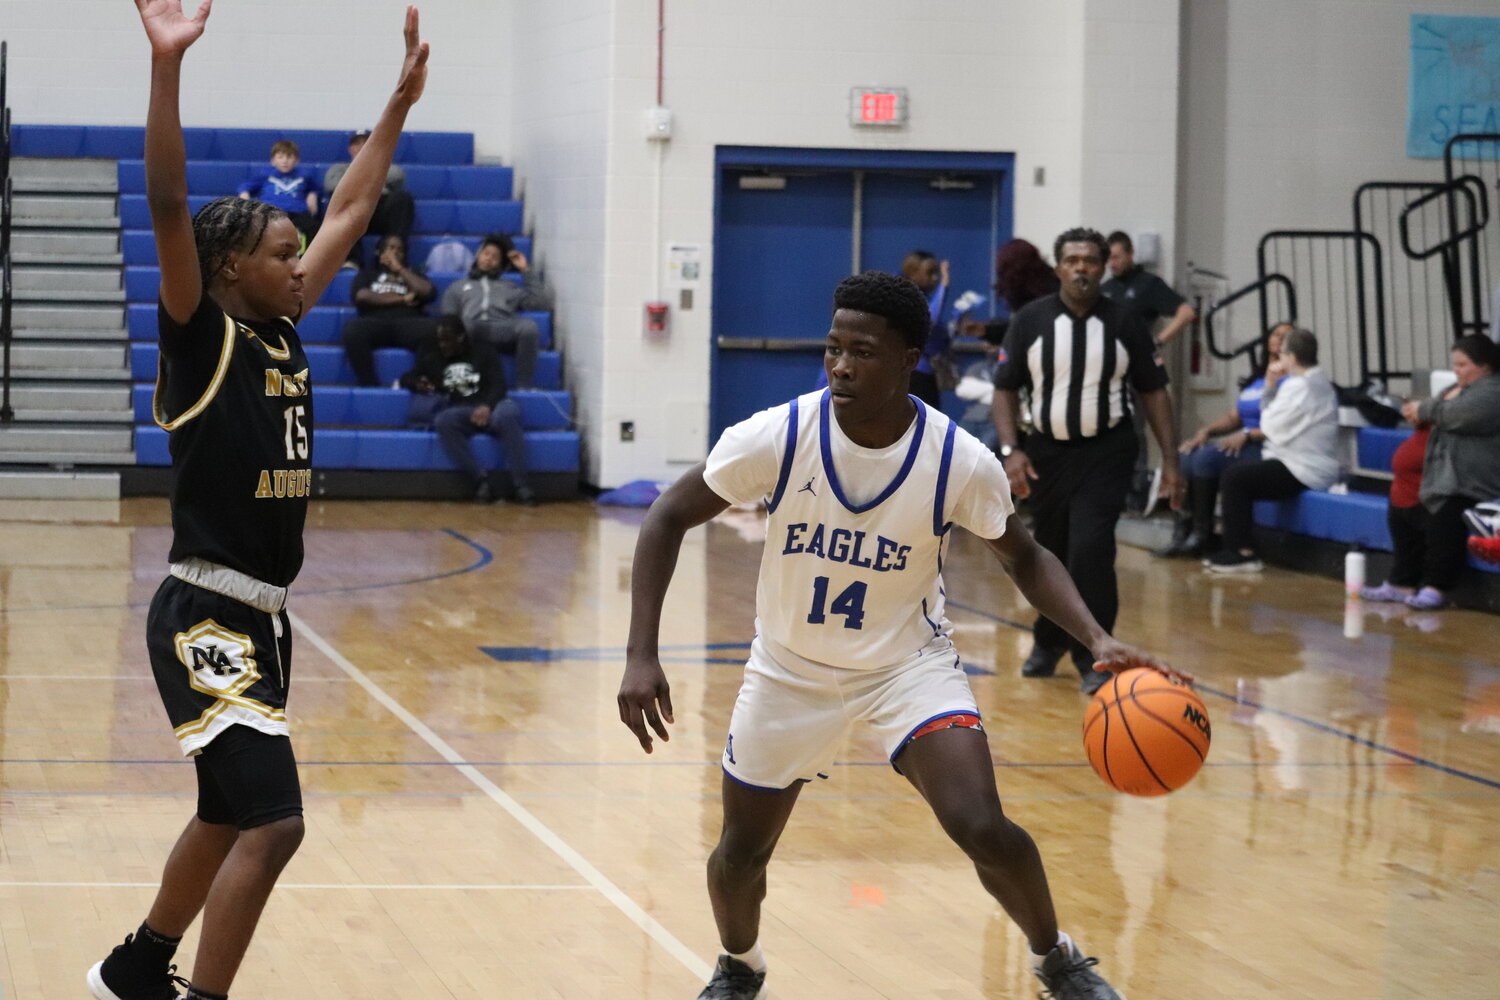 The Airport boys fell in its final game of the season on its home floor last Friday night.